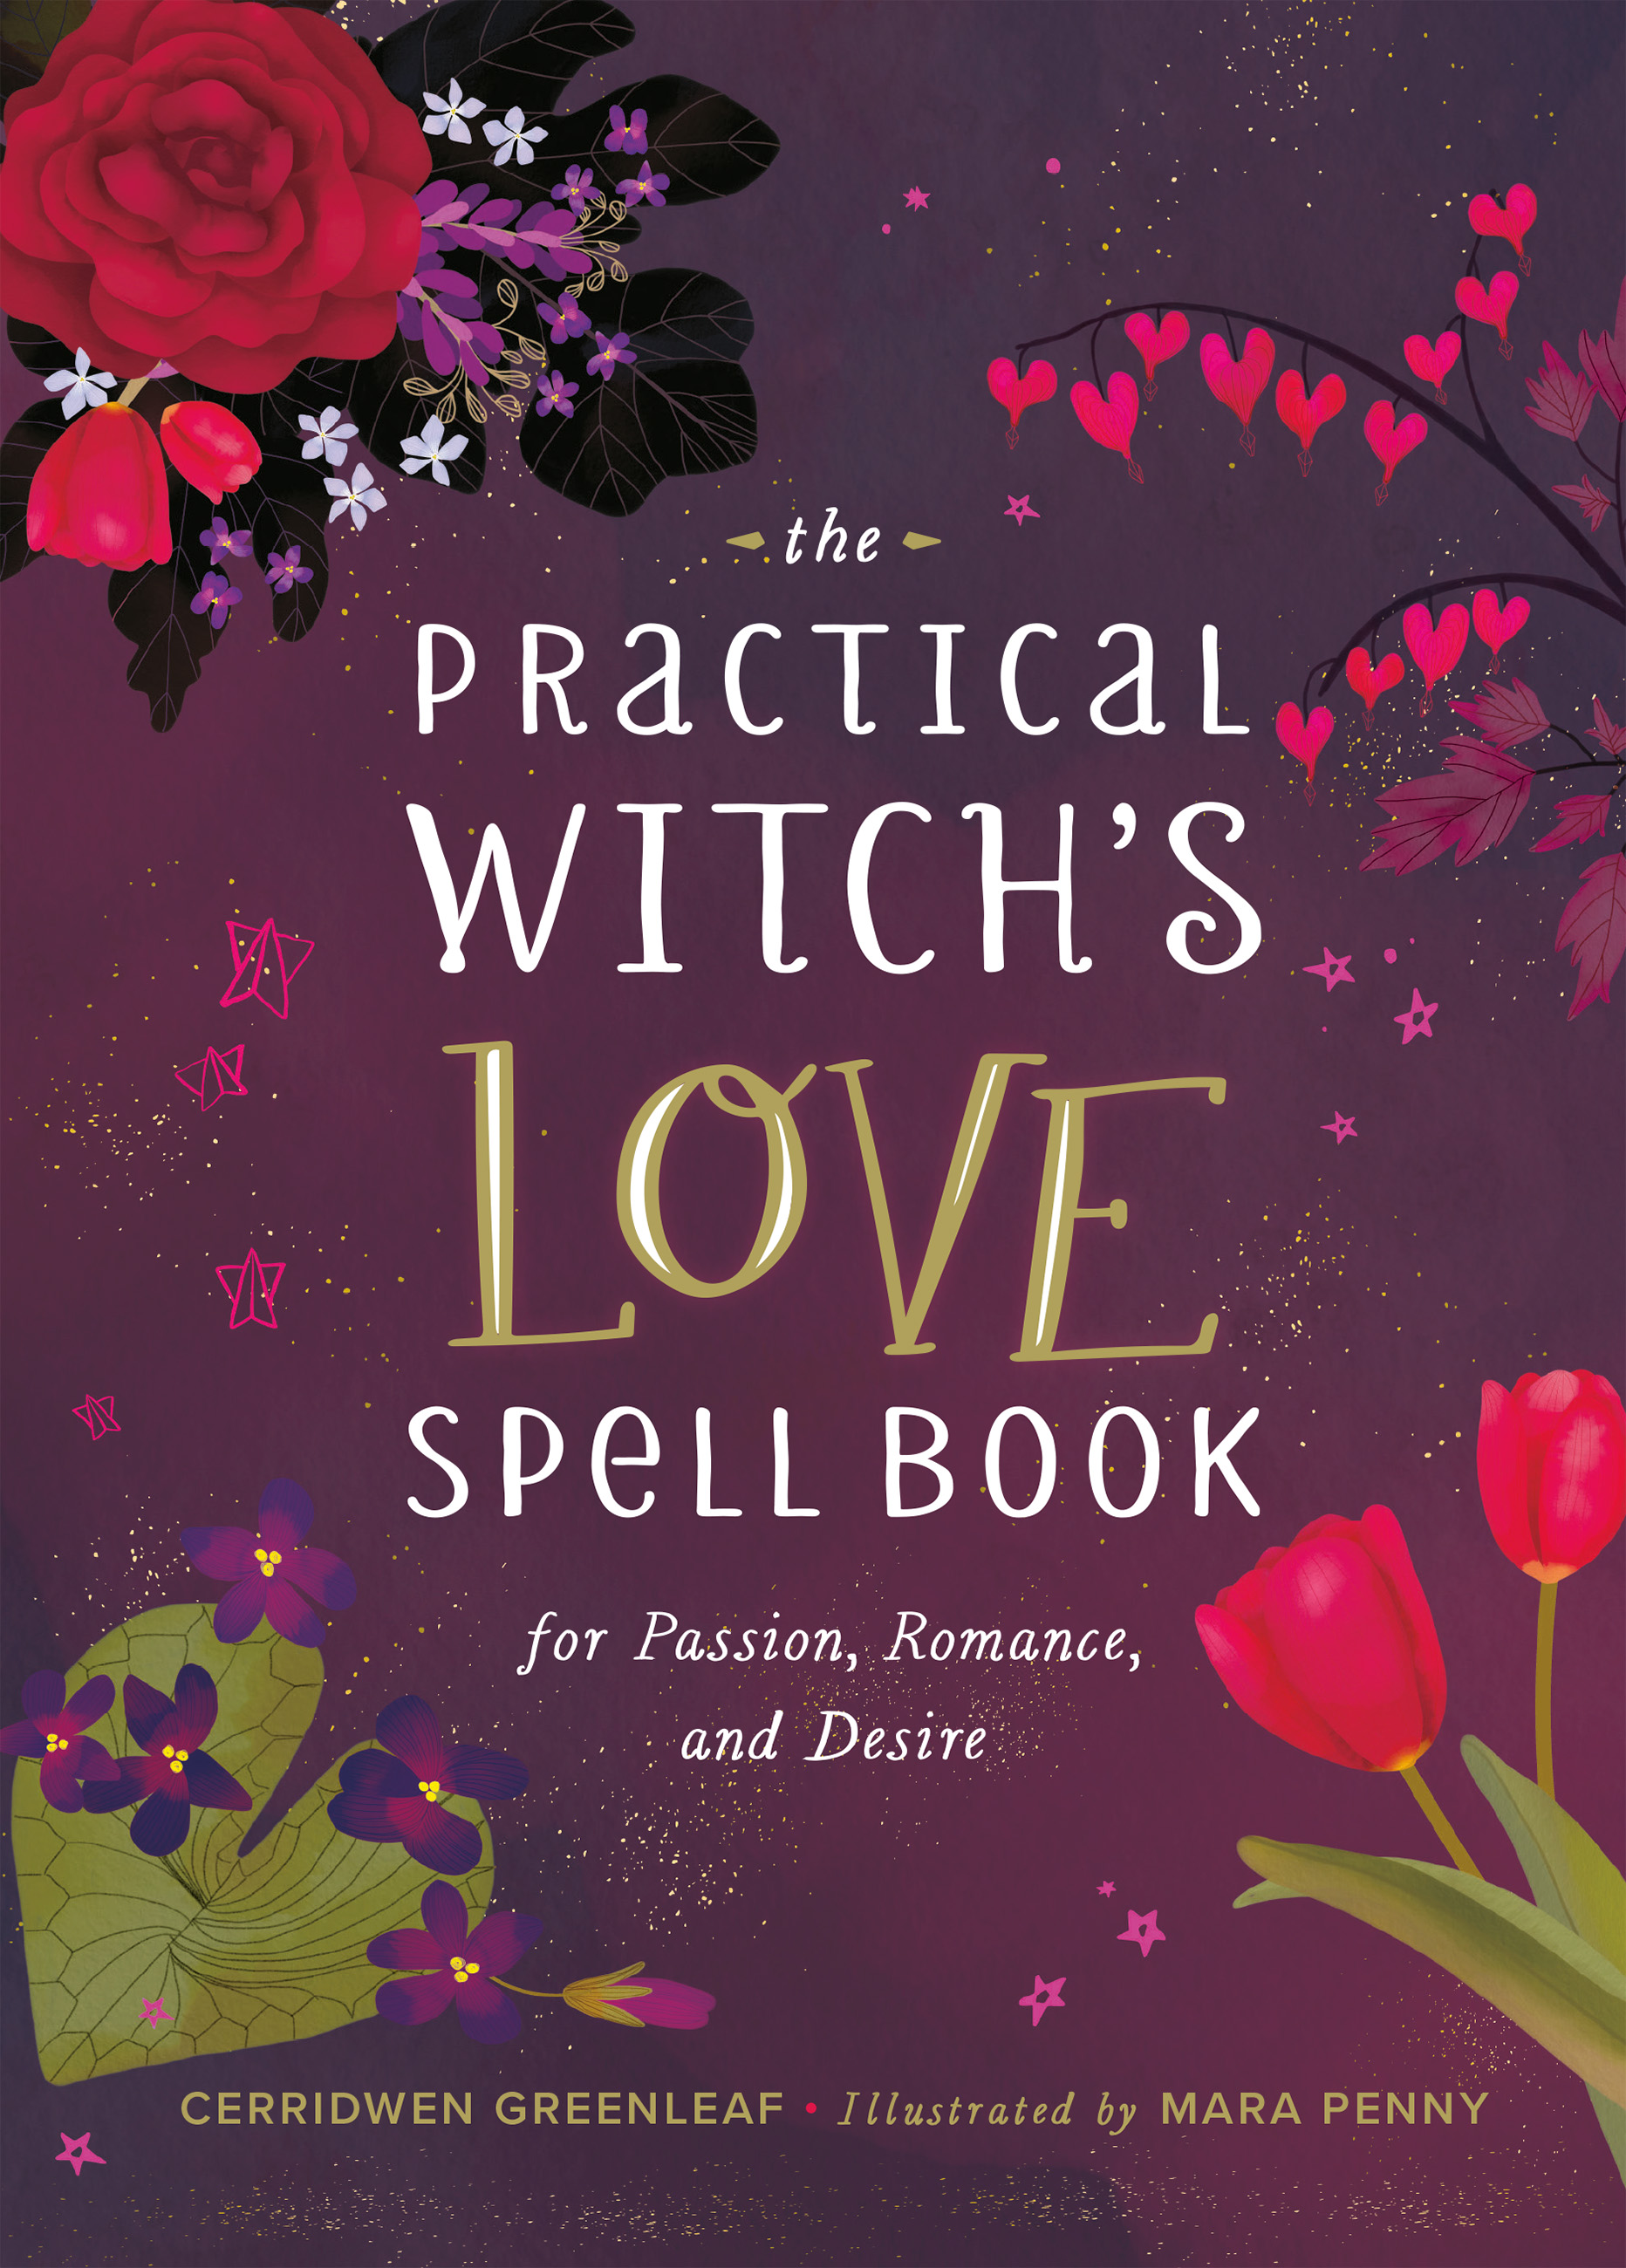 The Practical Witch's Love Spell Book by Cerridwen Greenleaf